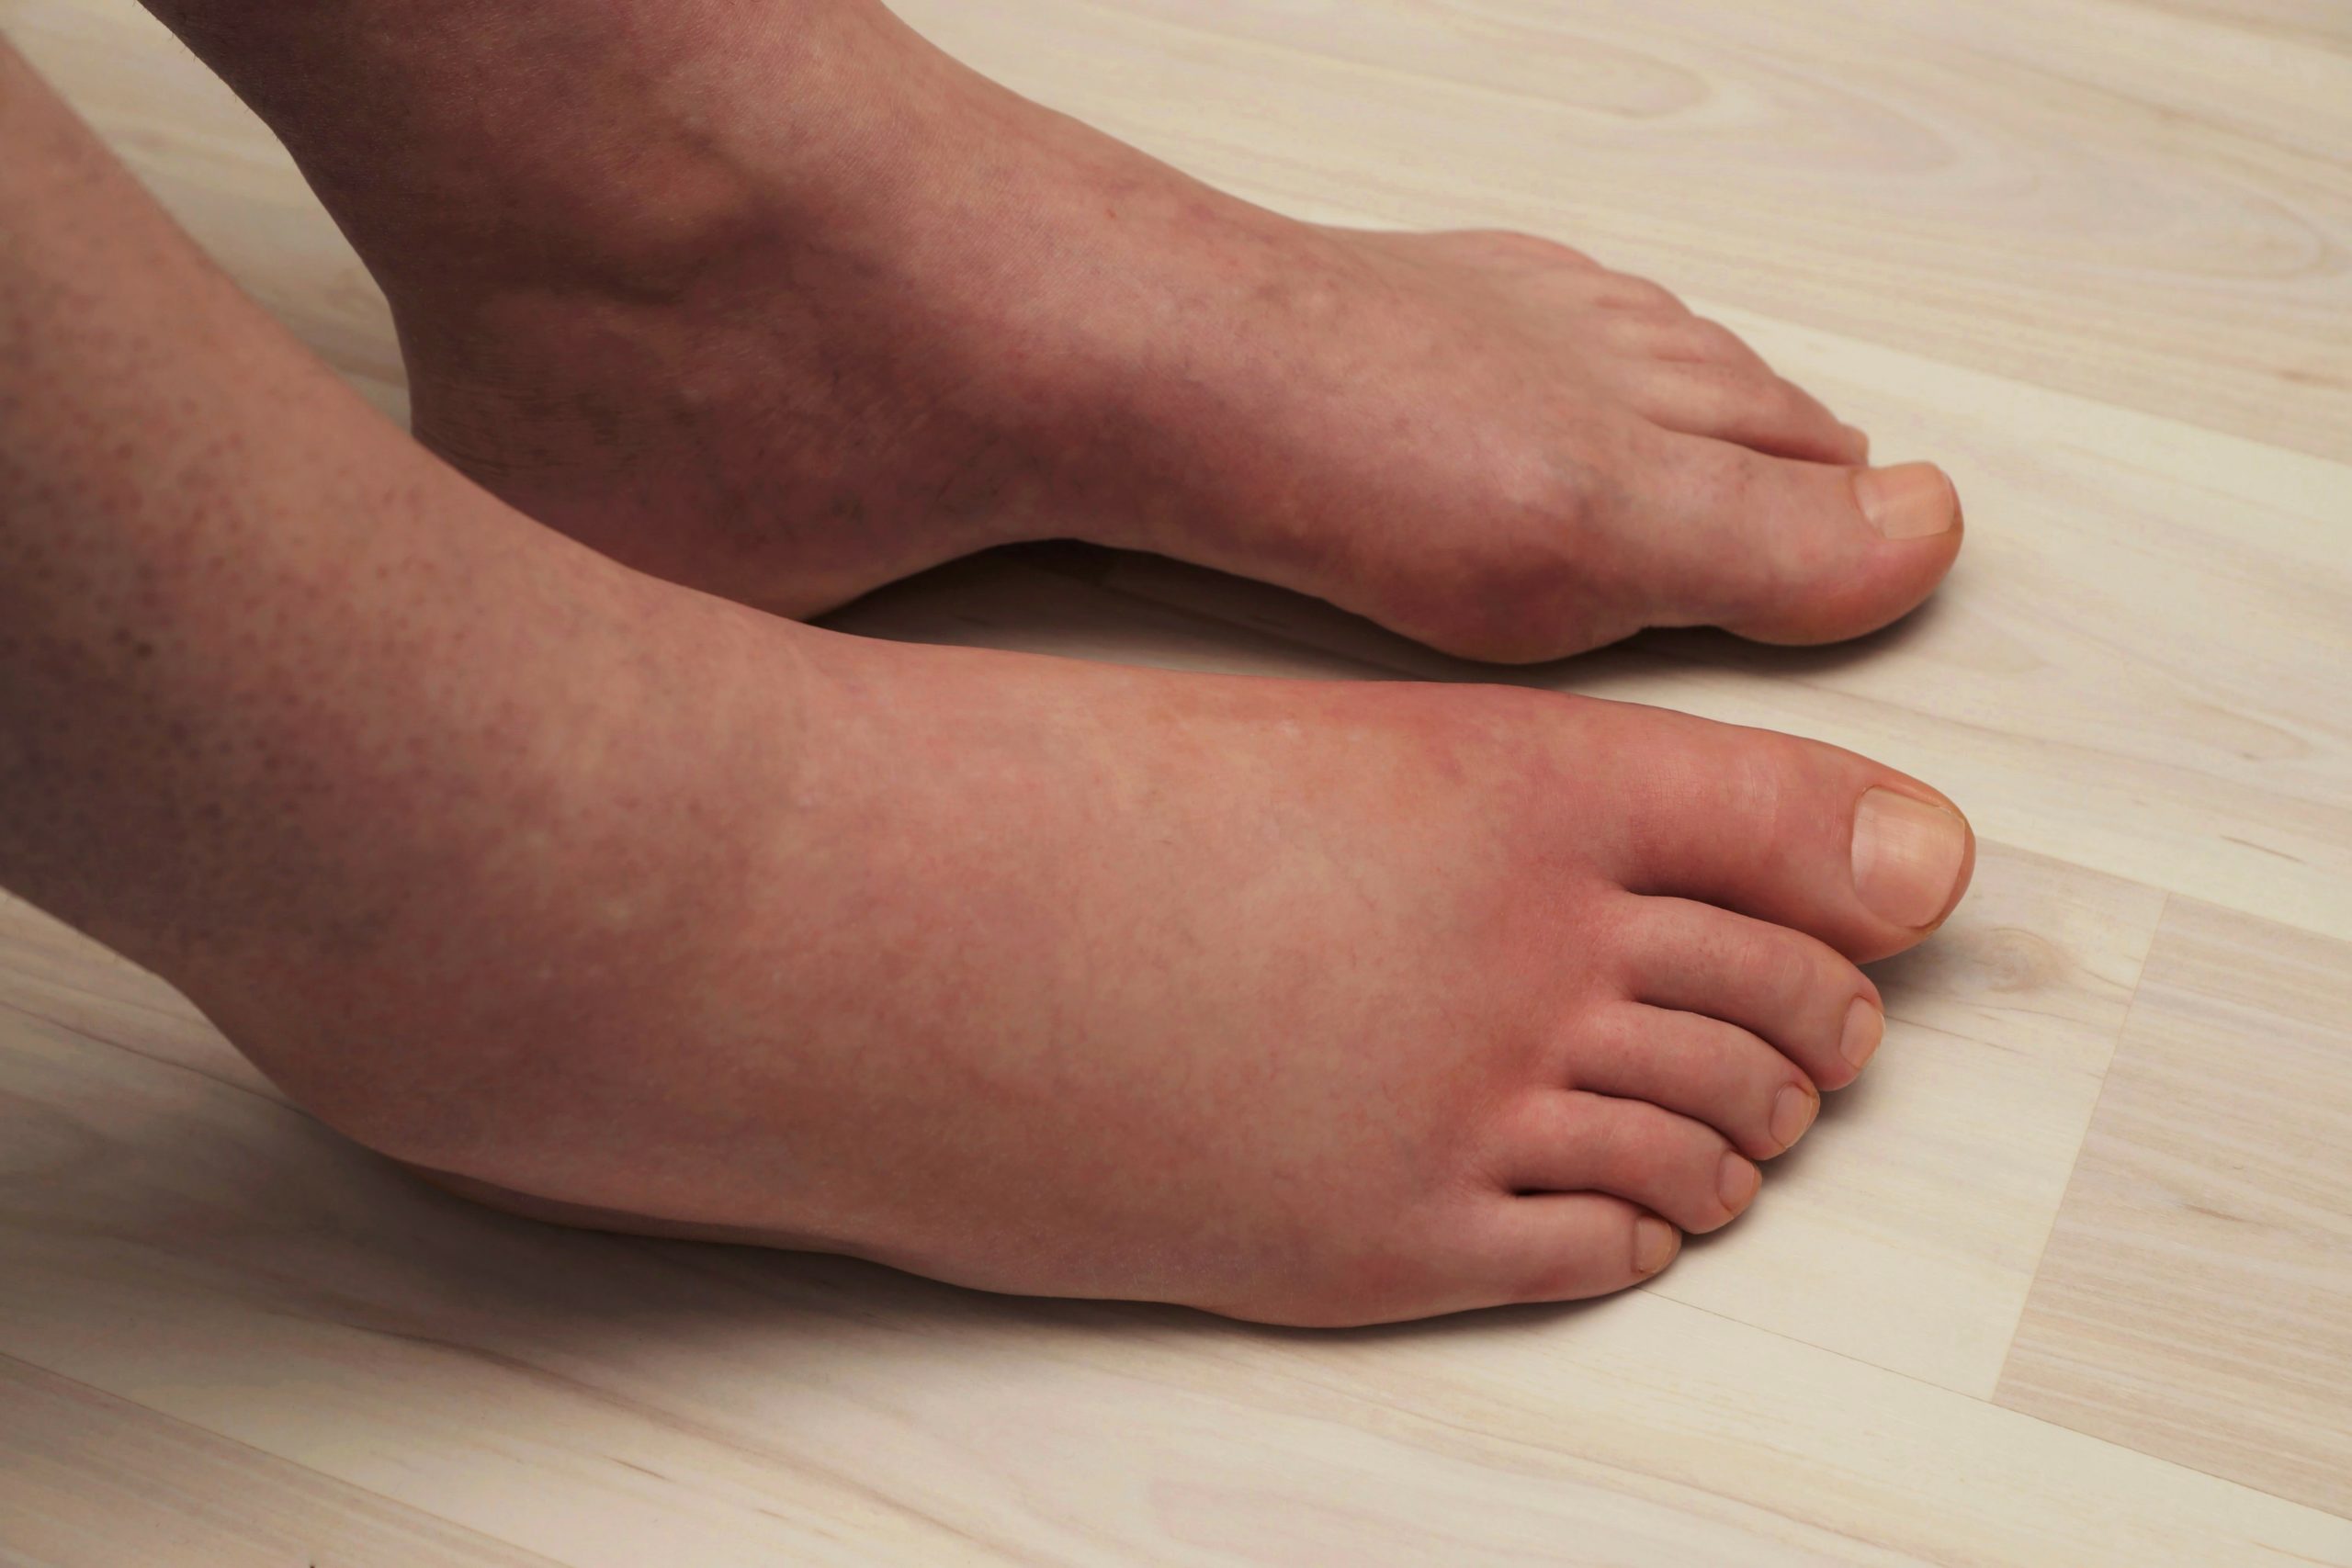 Edema in Ankles and Feet — Swollen Feet During Pregnancy — Causes and Cures